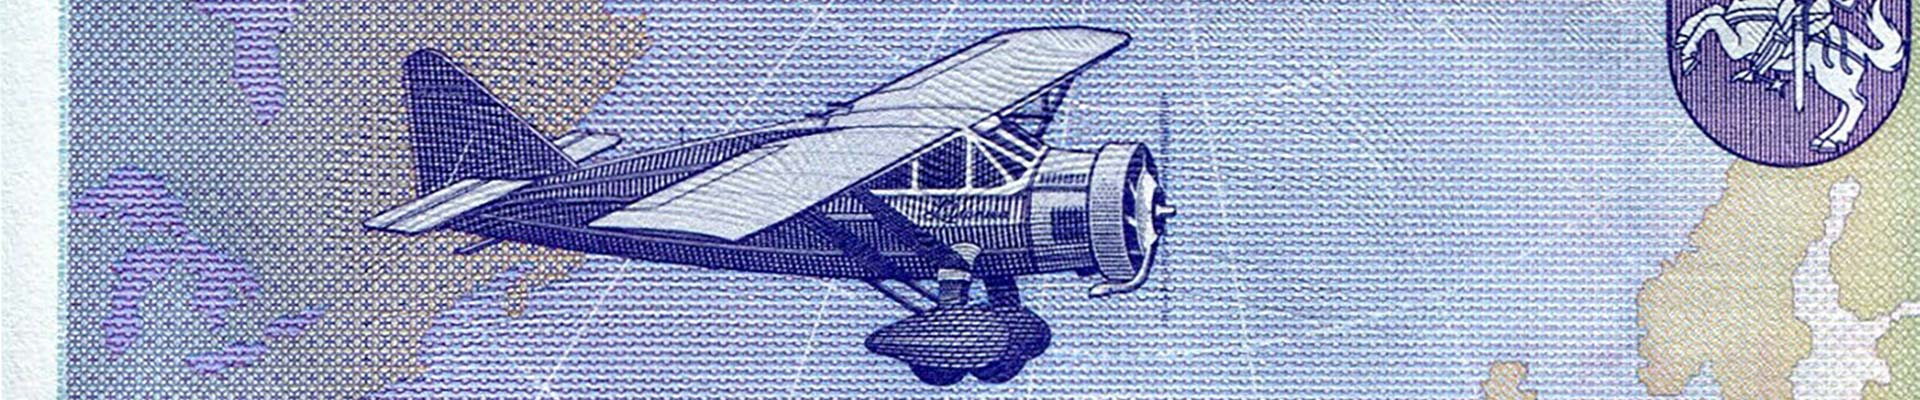 Aviation and the Banknote (Part 1) - The Concorde header image